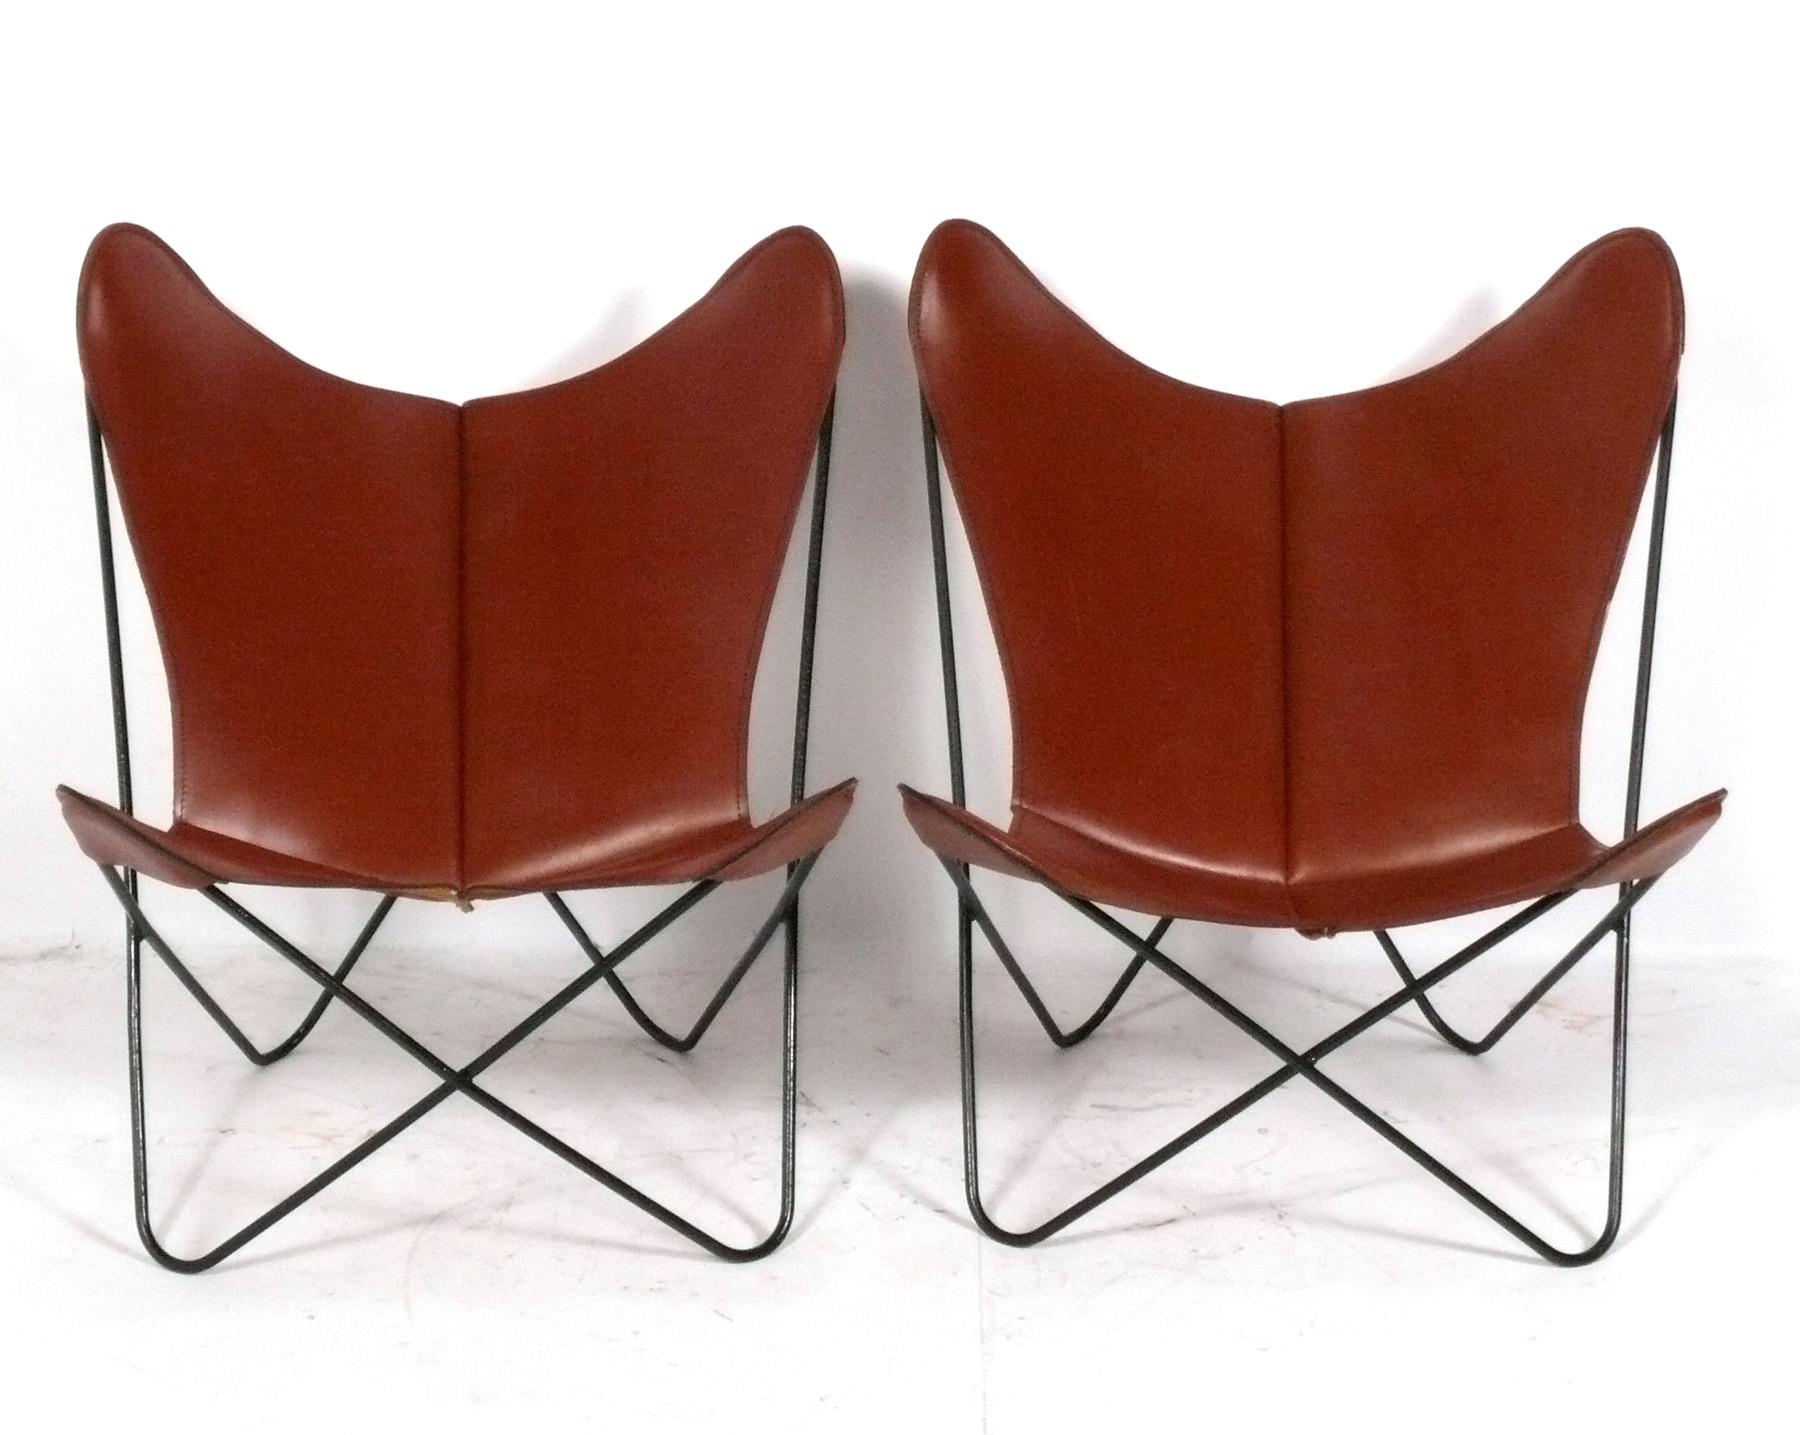 Pair of Sculptural Butterfly Lounge Chair designed by Jorge Ferrari-Hardoy, circa 1960s. Rarely seen in their original cognac leather, these chairs have a great patina that you only get with age. Broken in like your favorite baseball glove. The